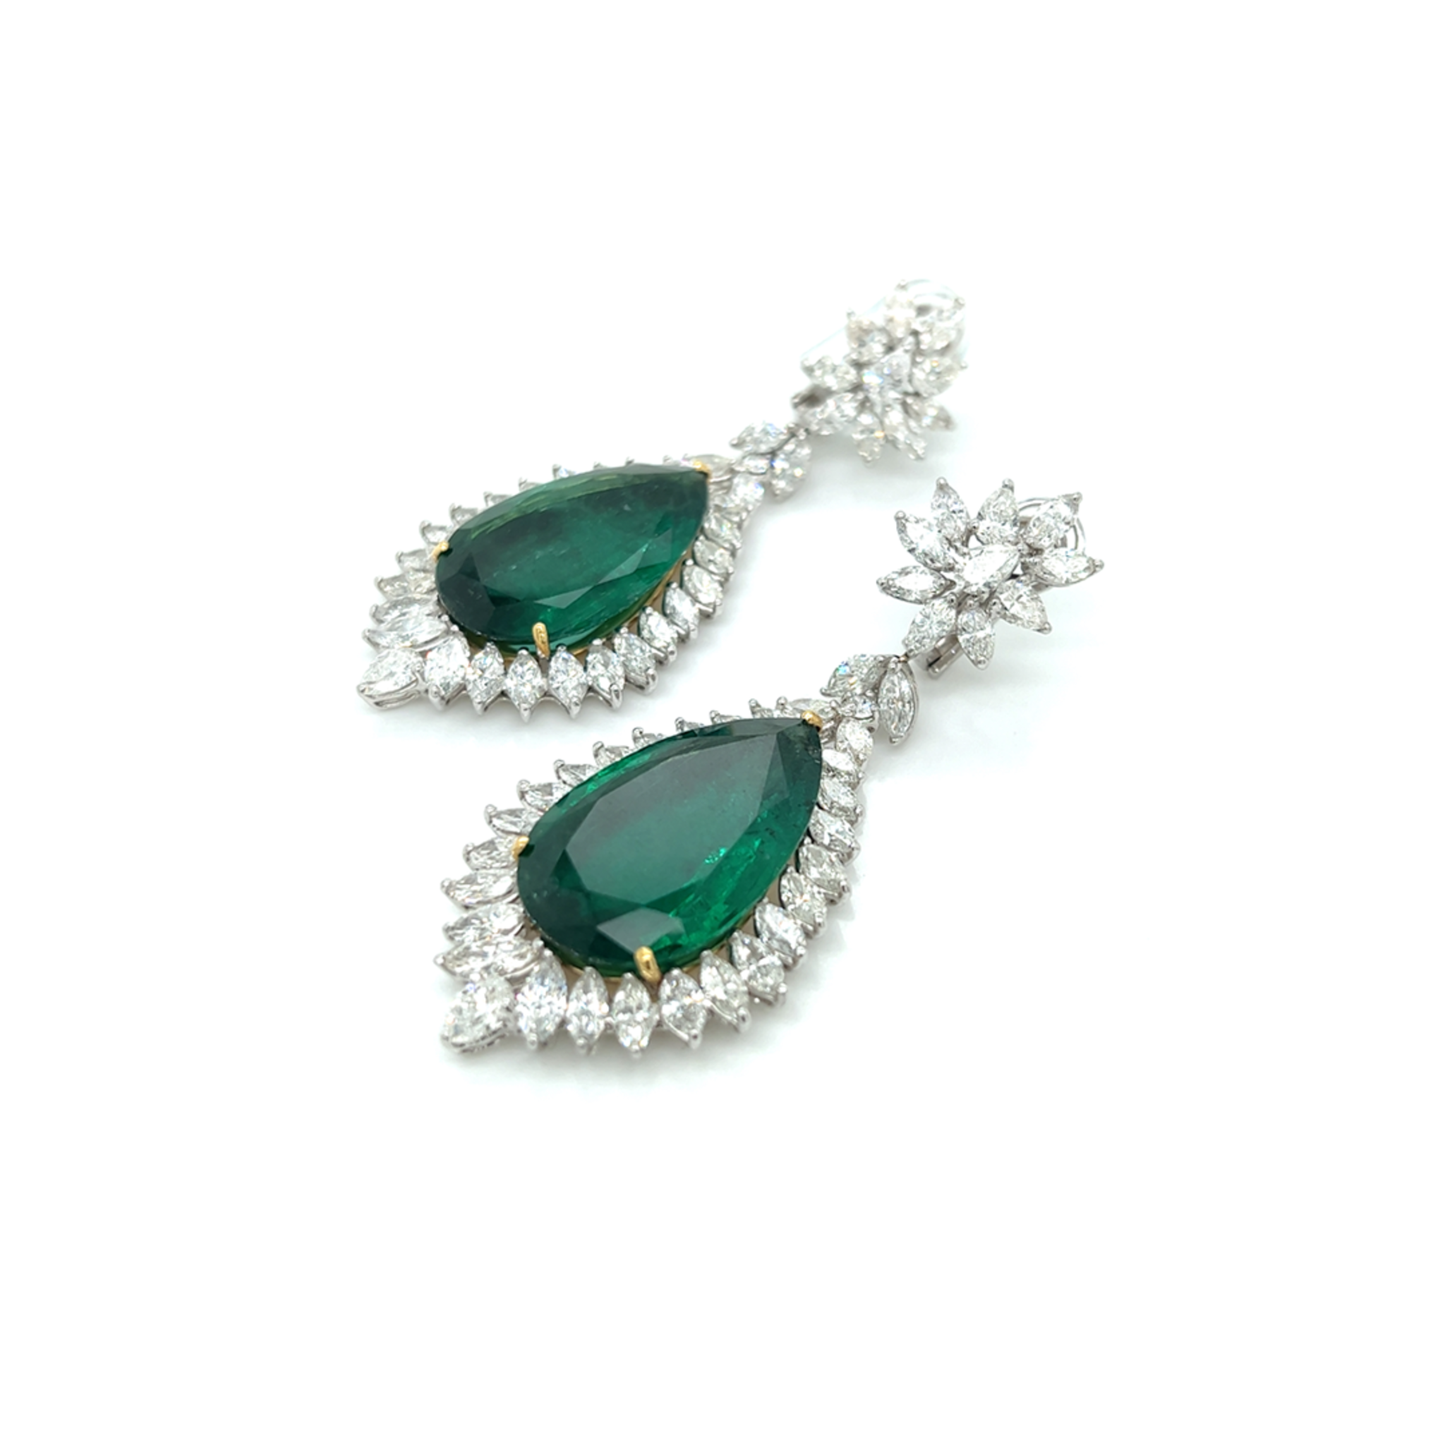 Post-1980s Platinum & 18KT White Gold Emerald & Diamond Earrings front and side